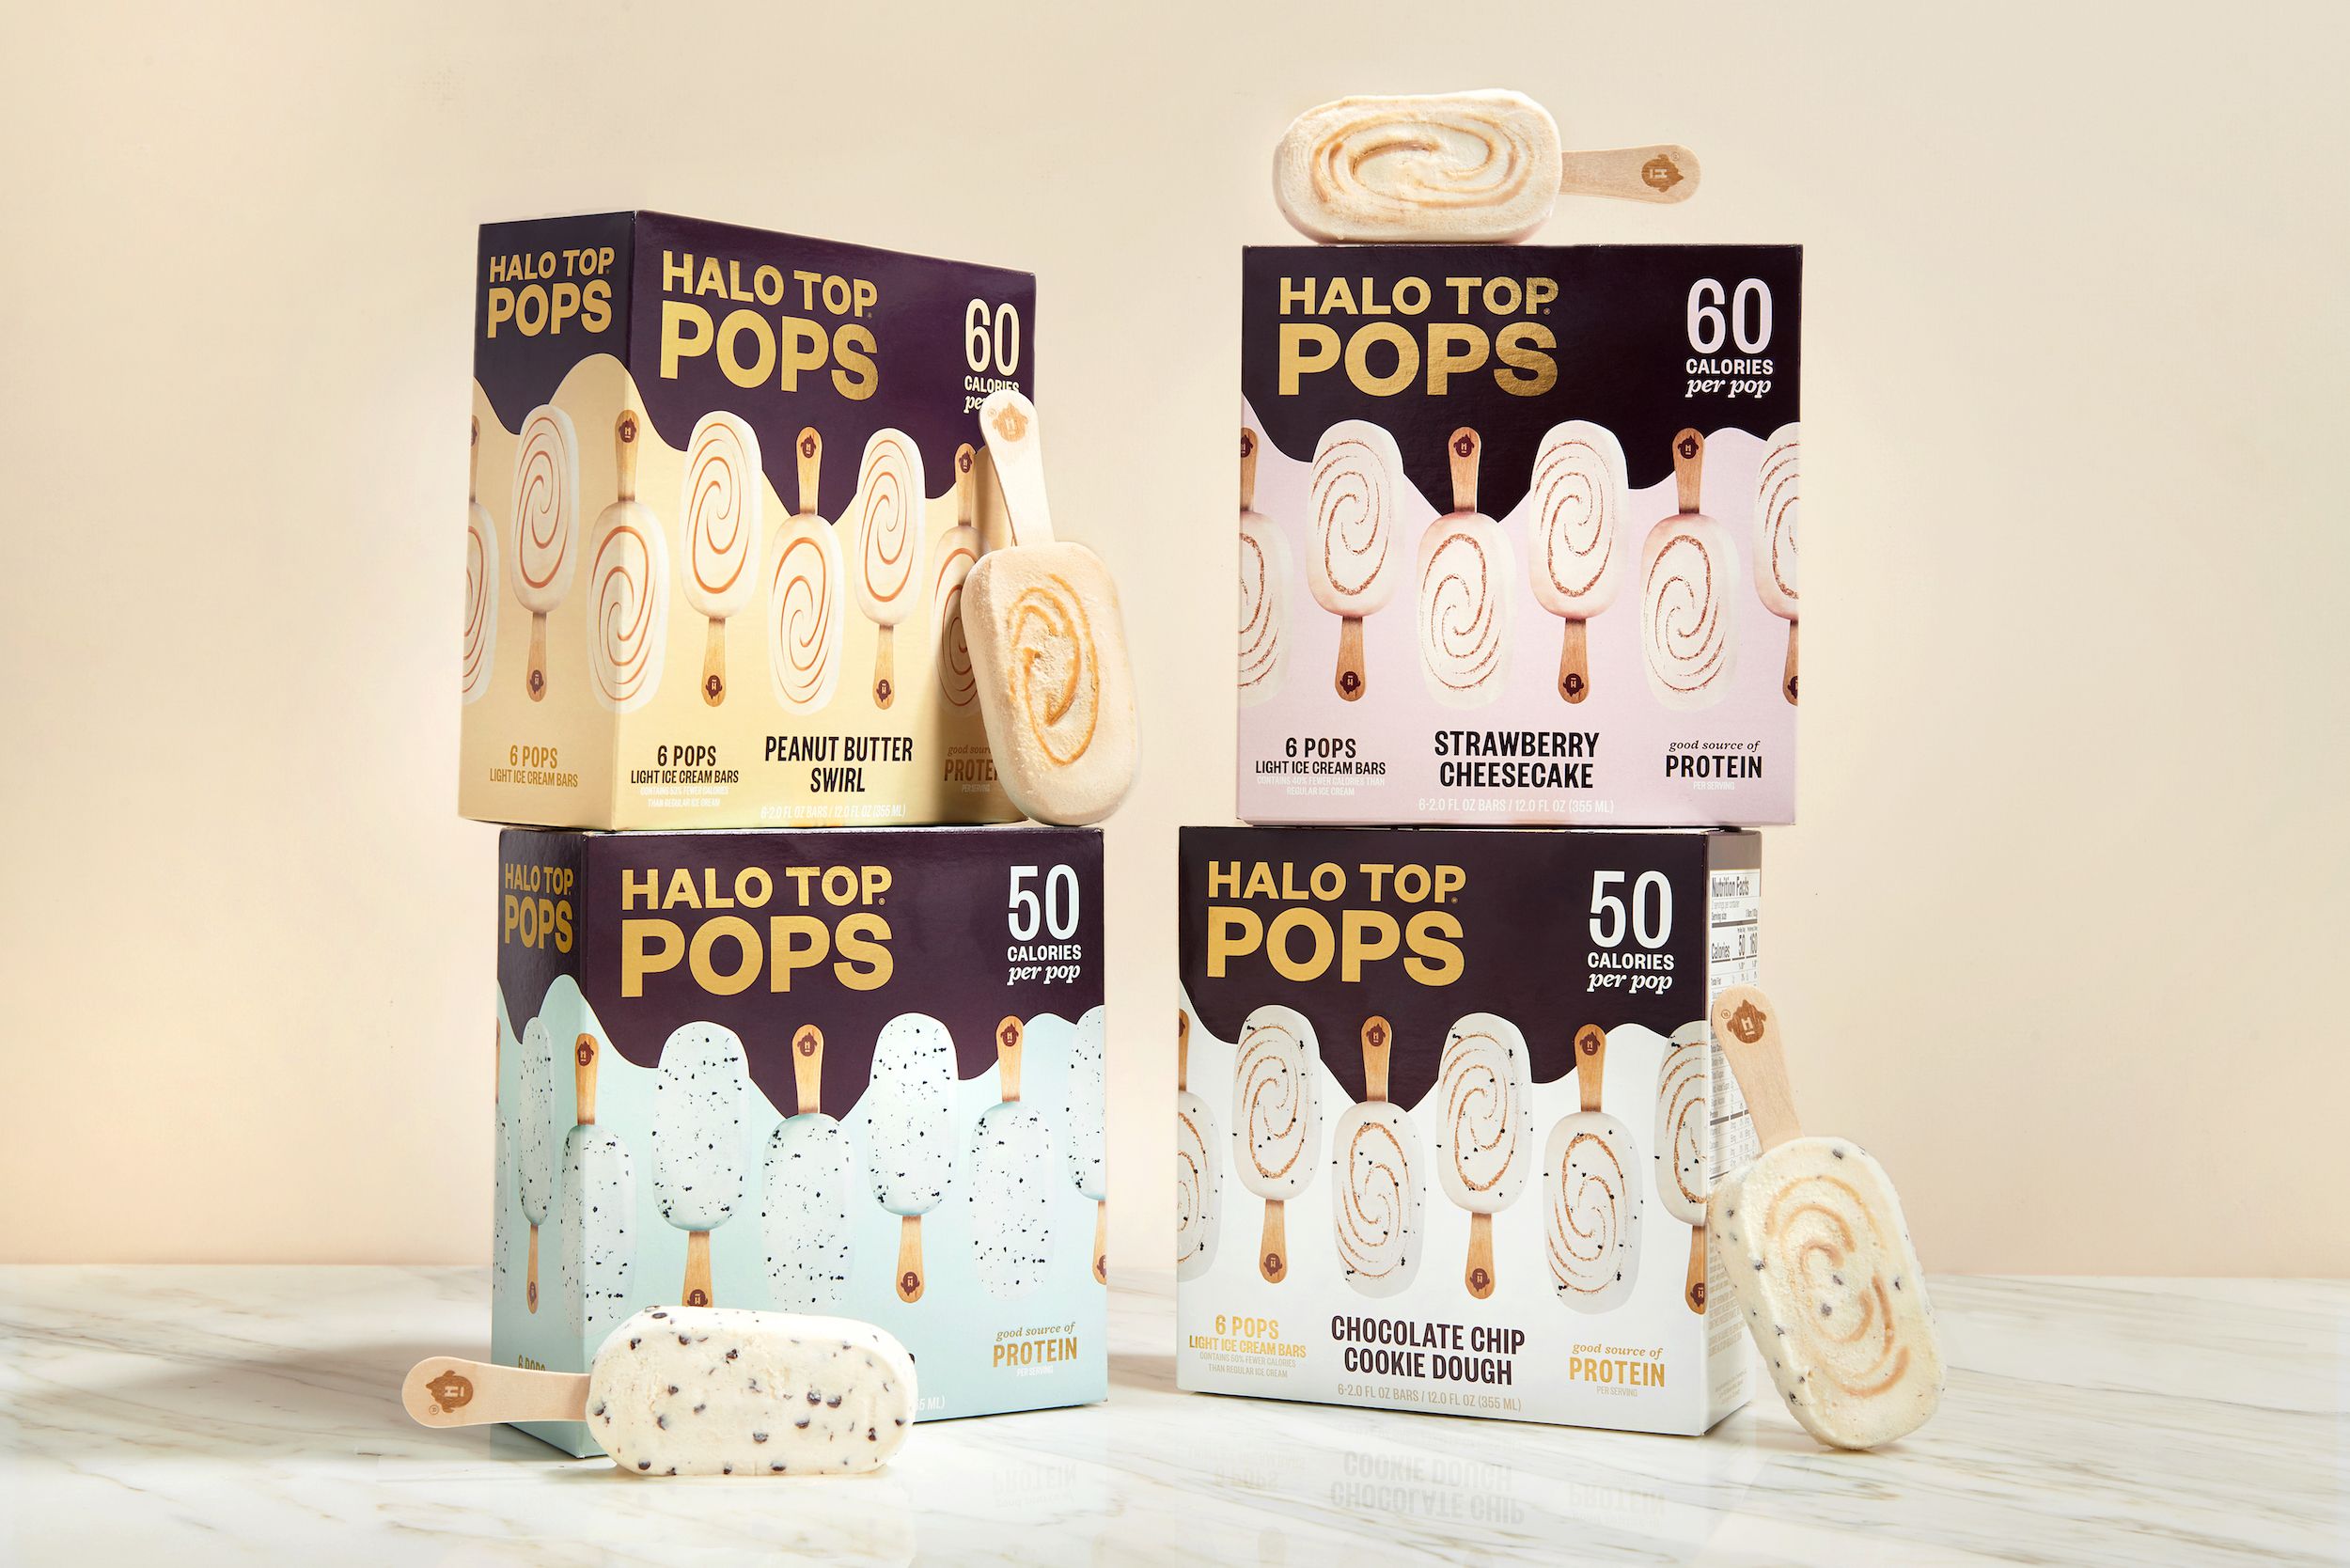 Halo Top S Healthy Popsicle Line Halo Top Pops Only Has 60 Calories